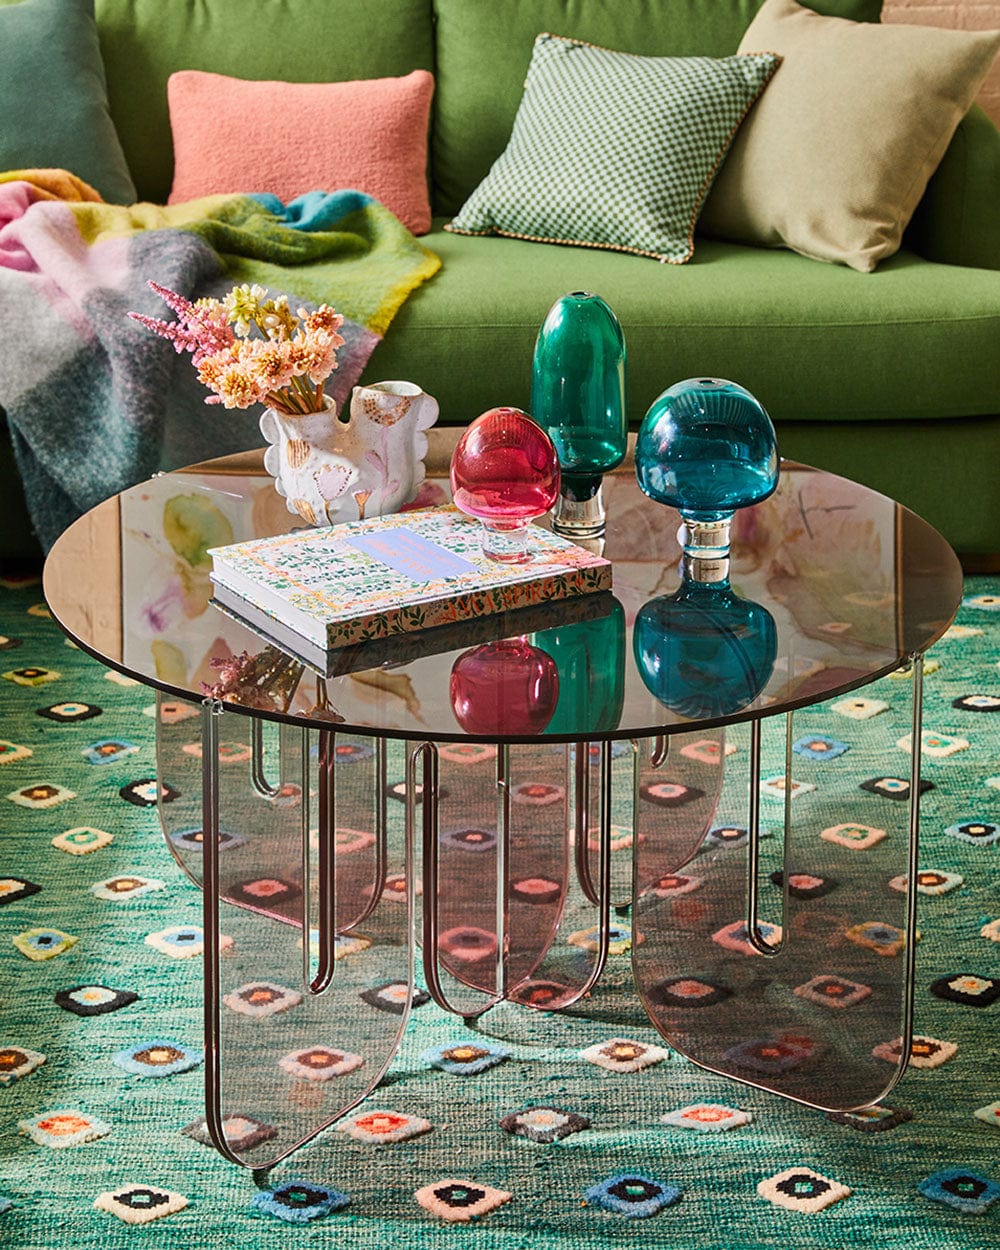 Ambalux Pink Wave Coffee Table